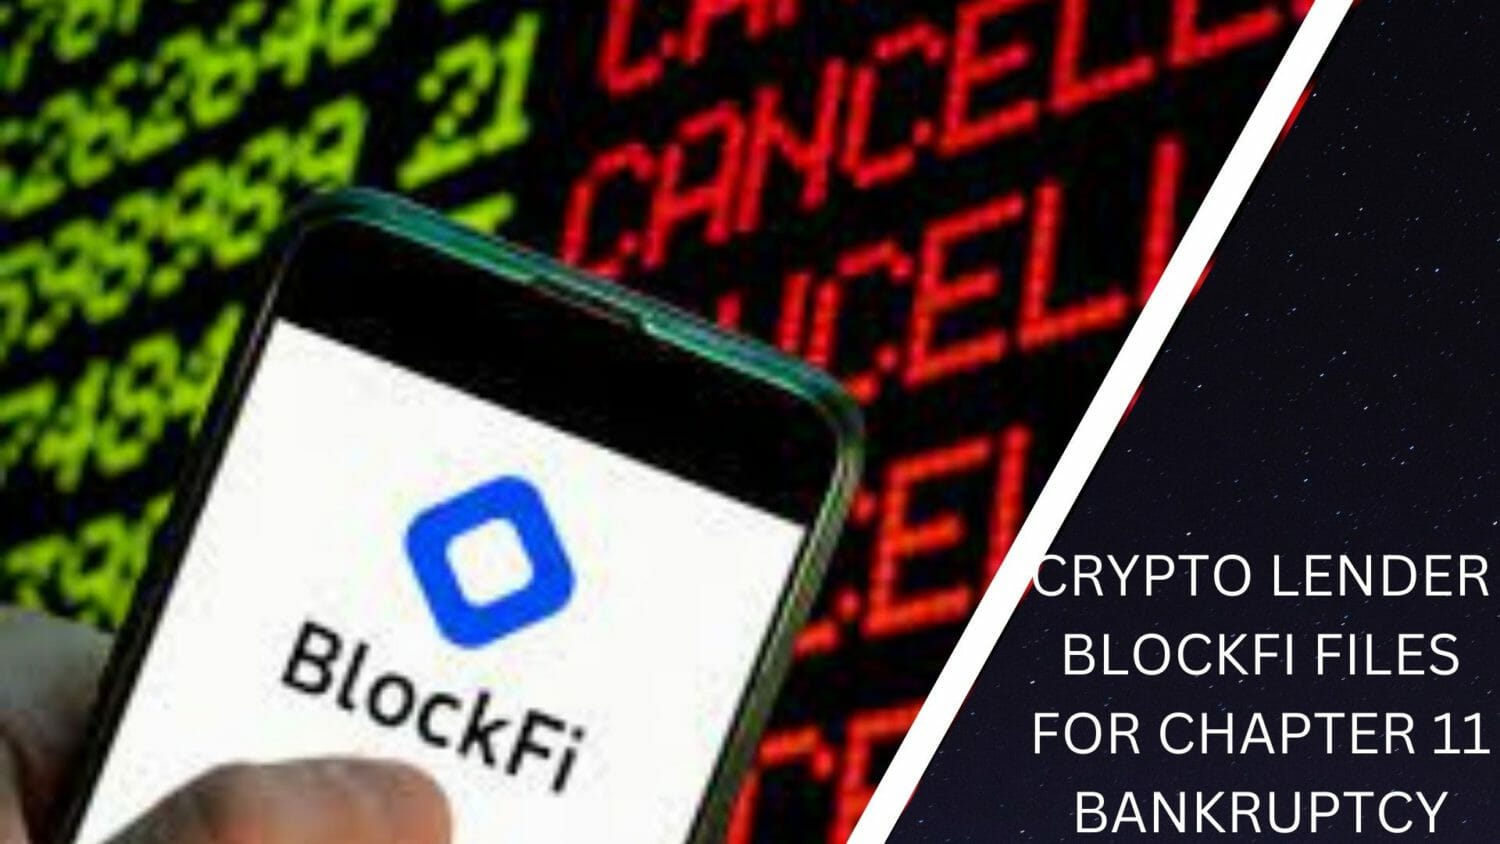 Crypto Lender Blockfi Files For Chapter 11 Bankruptcy